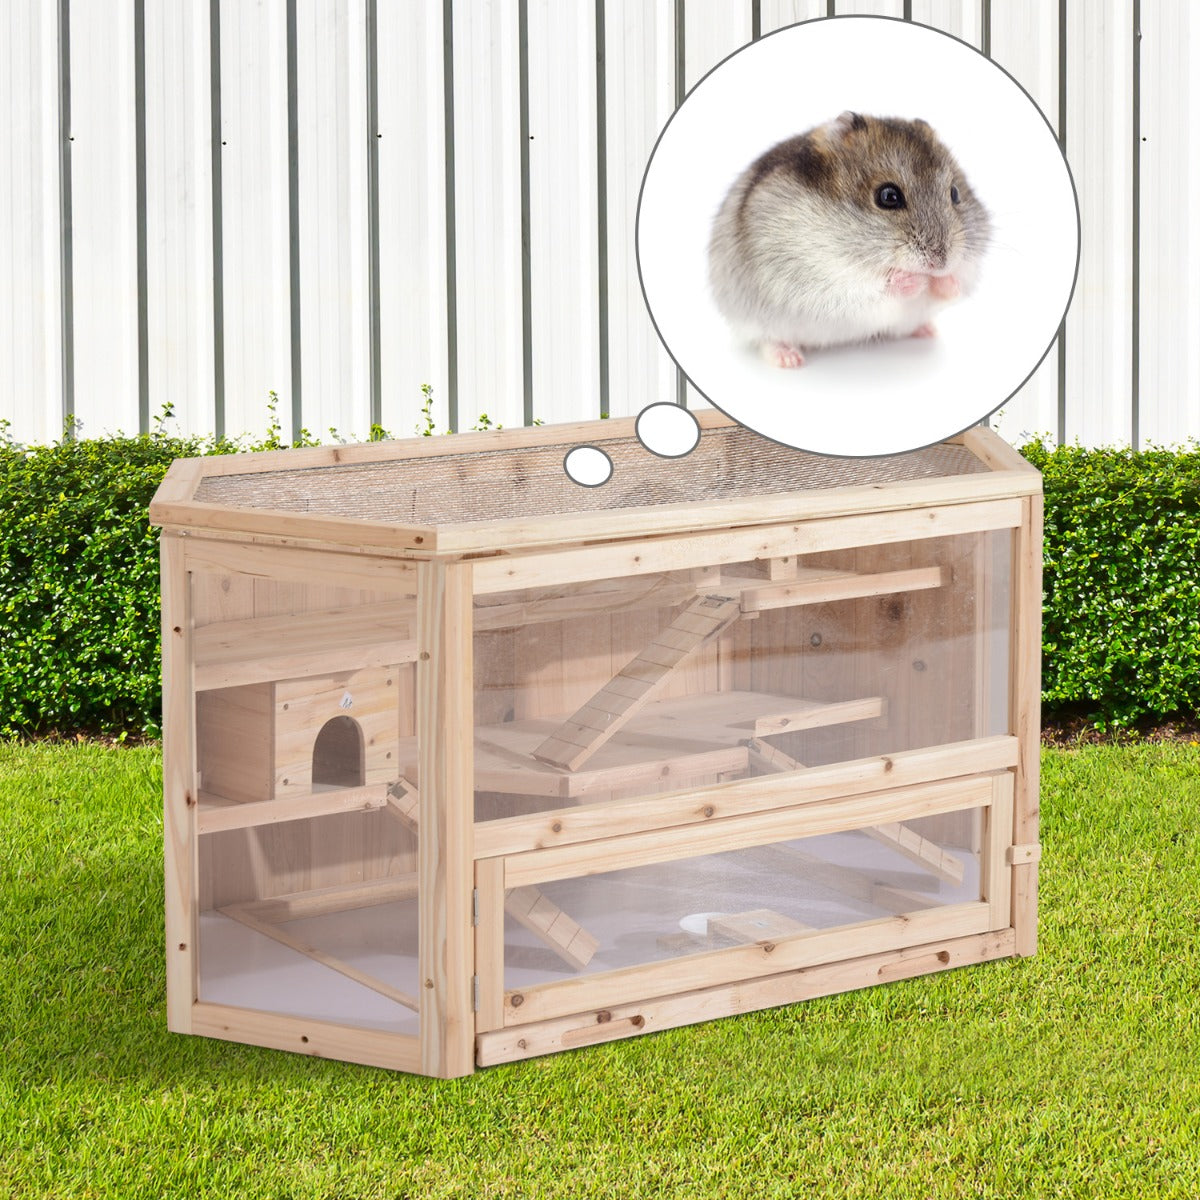 PawHut Fir Wood Hamster Cage Mouse Rats Small Animal Exercise Play